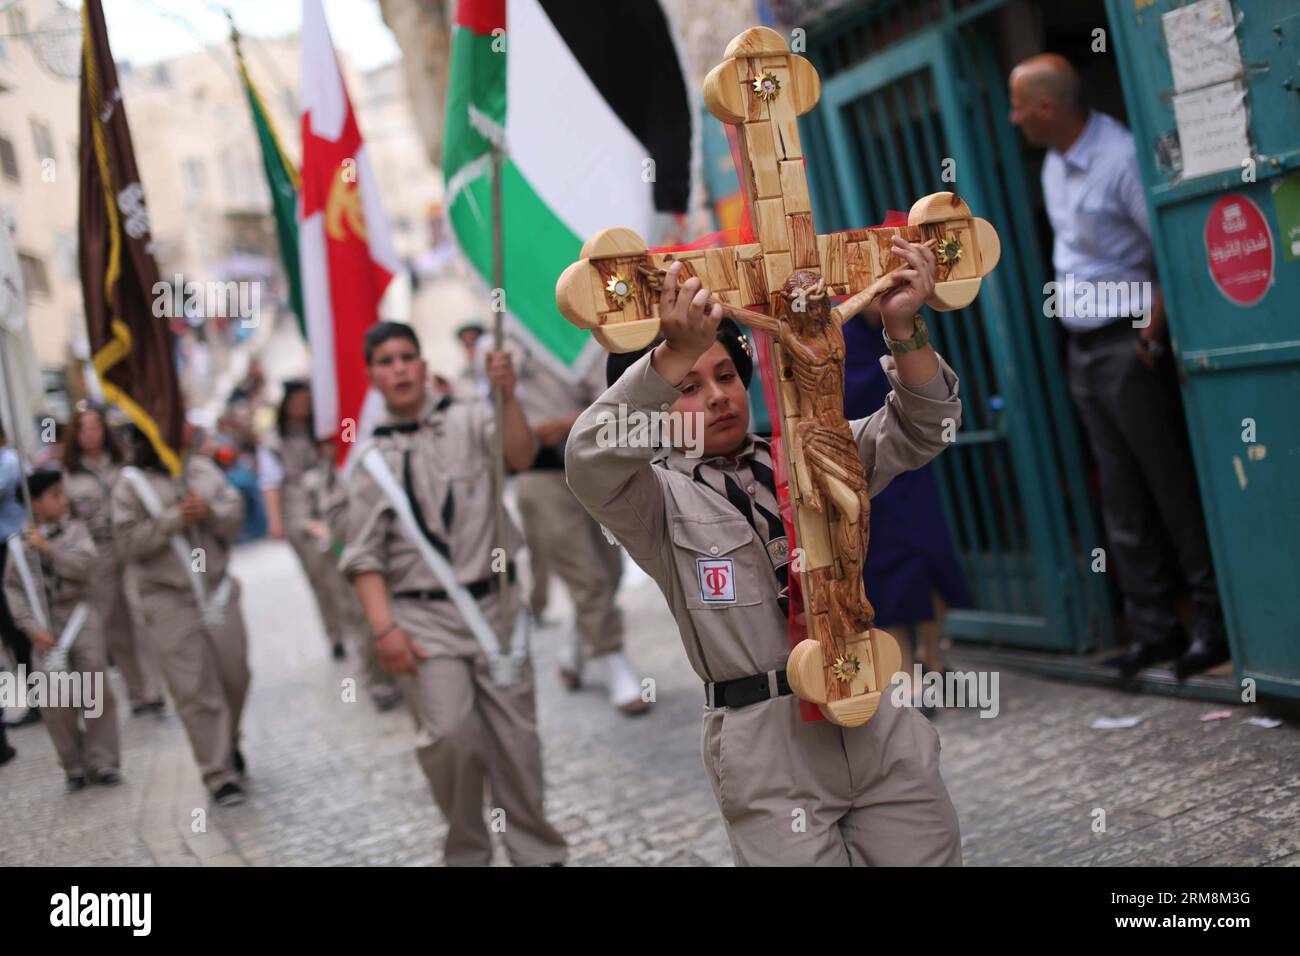 (140420) -- BETHLEHEM, April 20, 2014 (Xinhua) - Palestinian scouts perform as they take part in the ceremony of the Holy Fire outside the Church of the Nativity, which is built over the traditional site of Jesus birth in Bethlehem, April 19, 2014. During the annual ceremony, top clerics enter the Aedicule, the small chamber marking the site of Jesus tomb at the Church of the Holy Sepulcher Jerusalem, traditionally believed to be the burial site of Jesus Christ. They emerge after to reveal candles lit with Holy Fire said to be miraculously lit as a message to the faithful from heaven. The deta Stock Photo